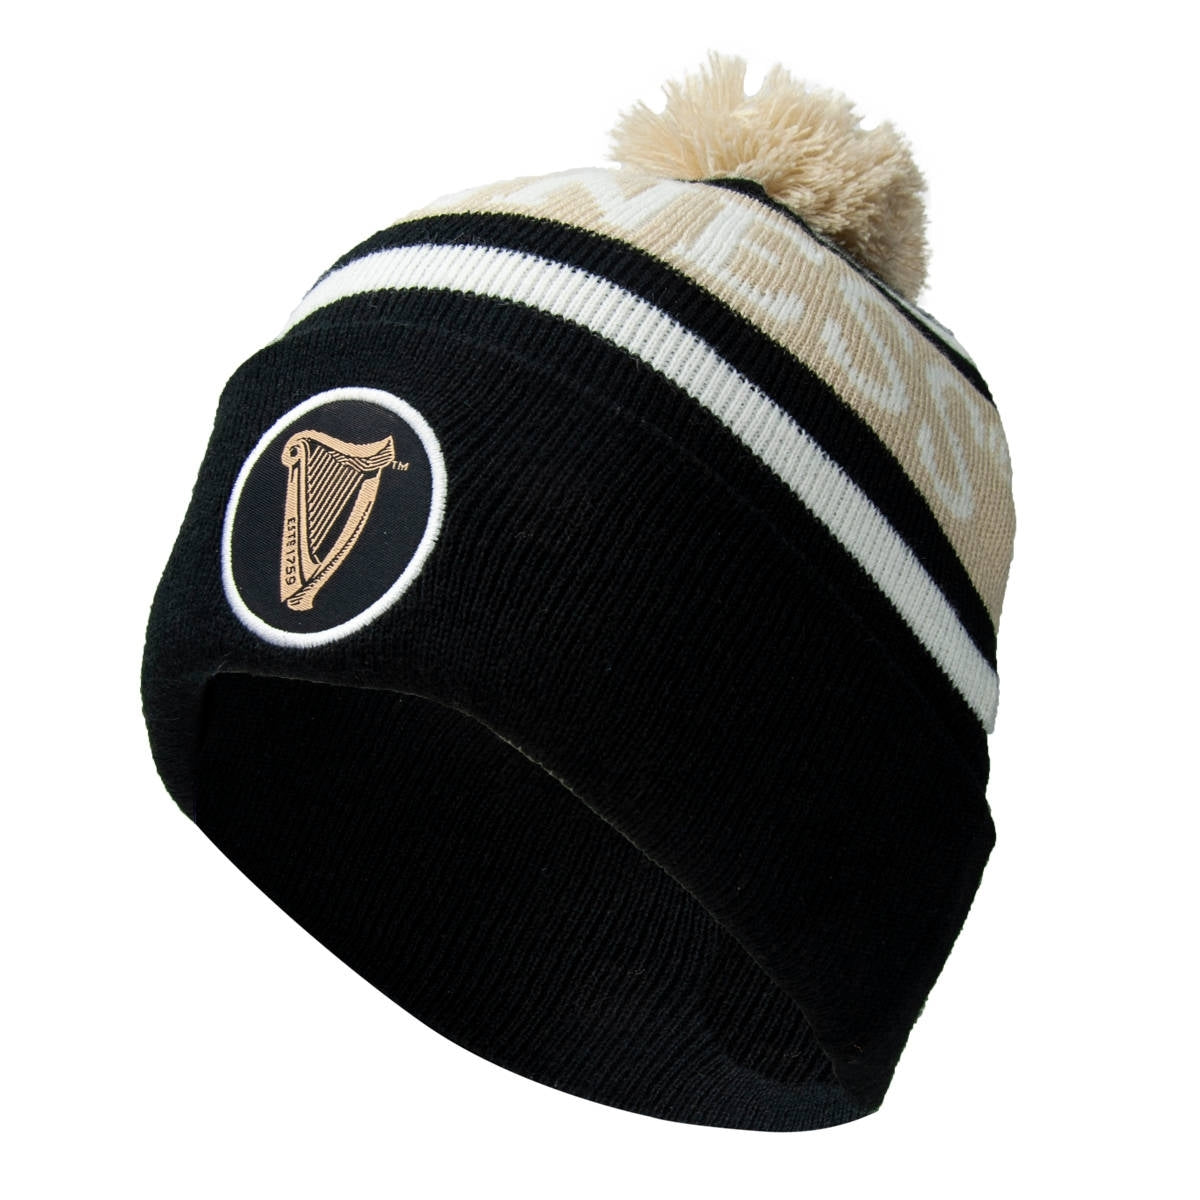 A warm Guinness Black and White Premium Beanie with a harp on it from Guinness UK.